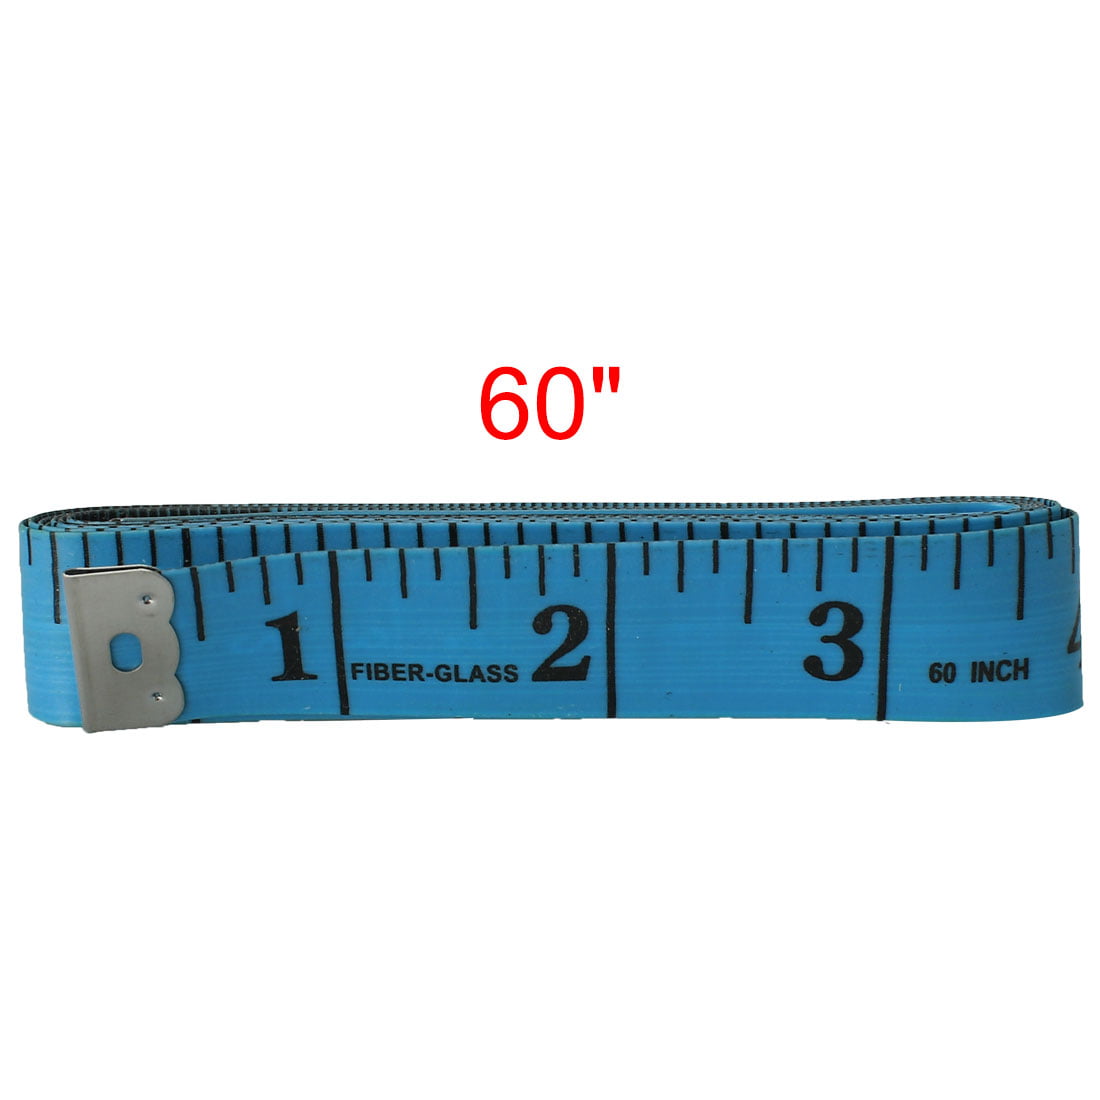 RPM 60 Inch Soft Tape Measure Sewing Tailor Ruler Measurement Tape Price in  India - Buy RPM 60 Inch Soft Tape Measure Sewing Tailor Ruler Measurement  Tape online at